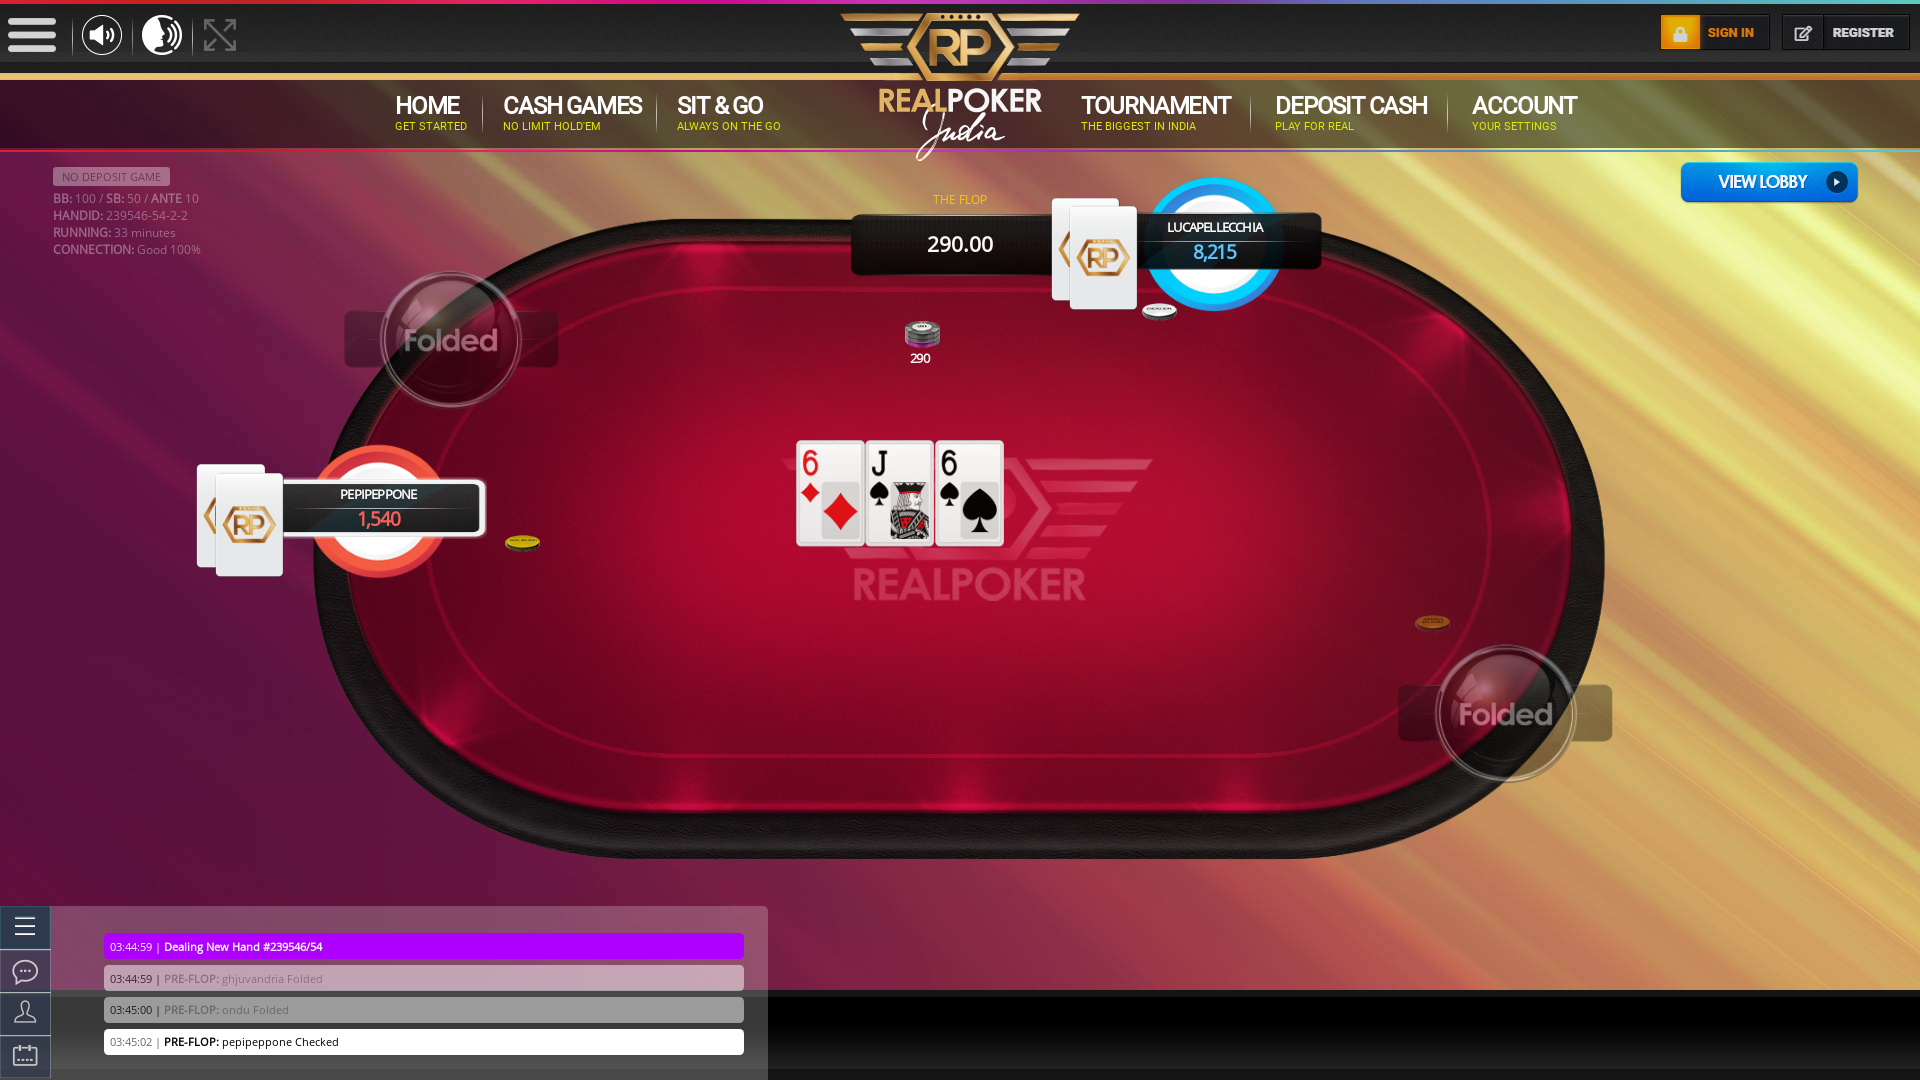 New Delhi texas holdem poker table on a 10 player table in the 33rd minute of the game